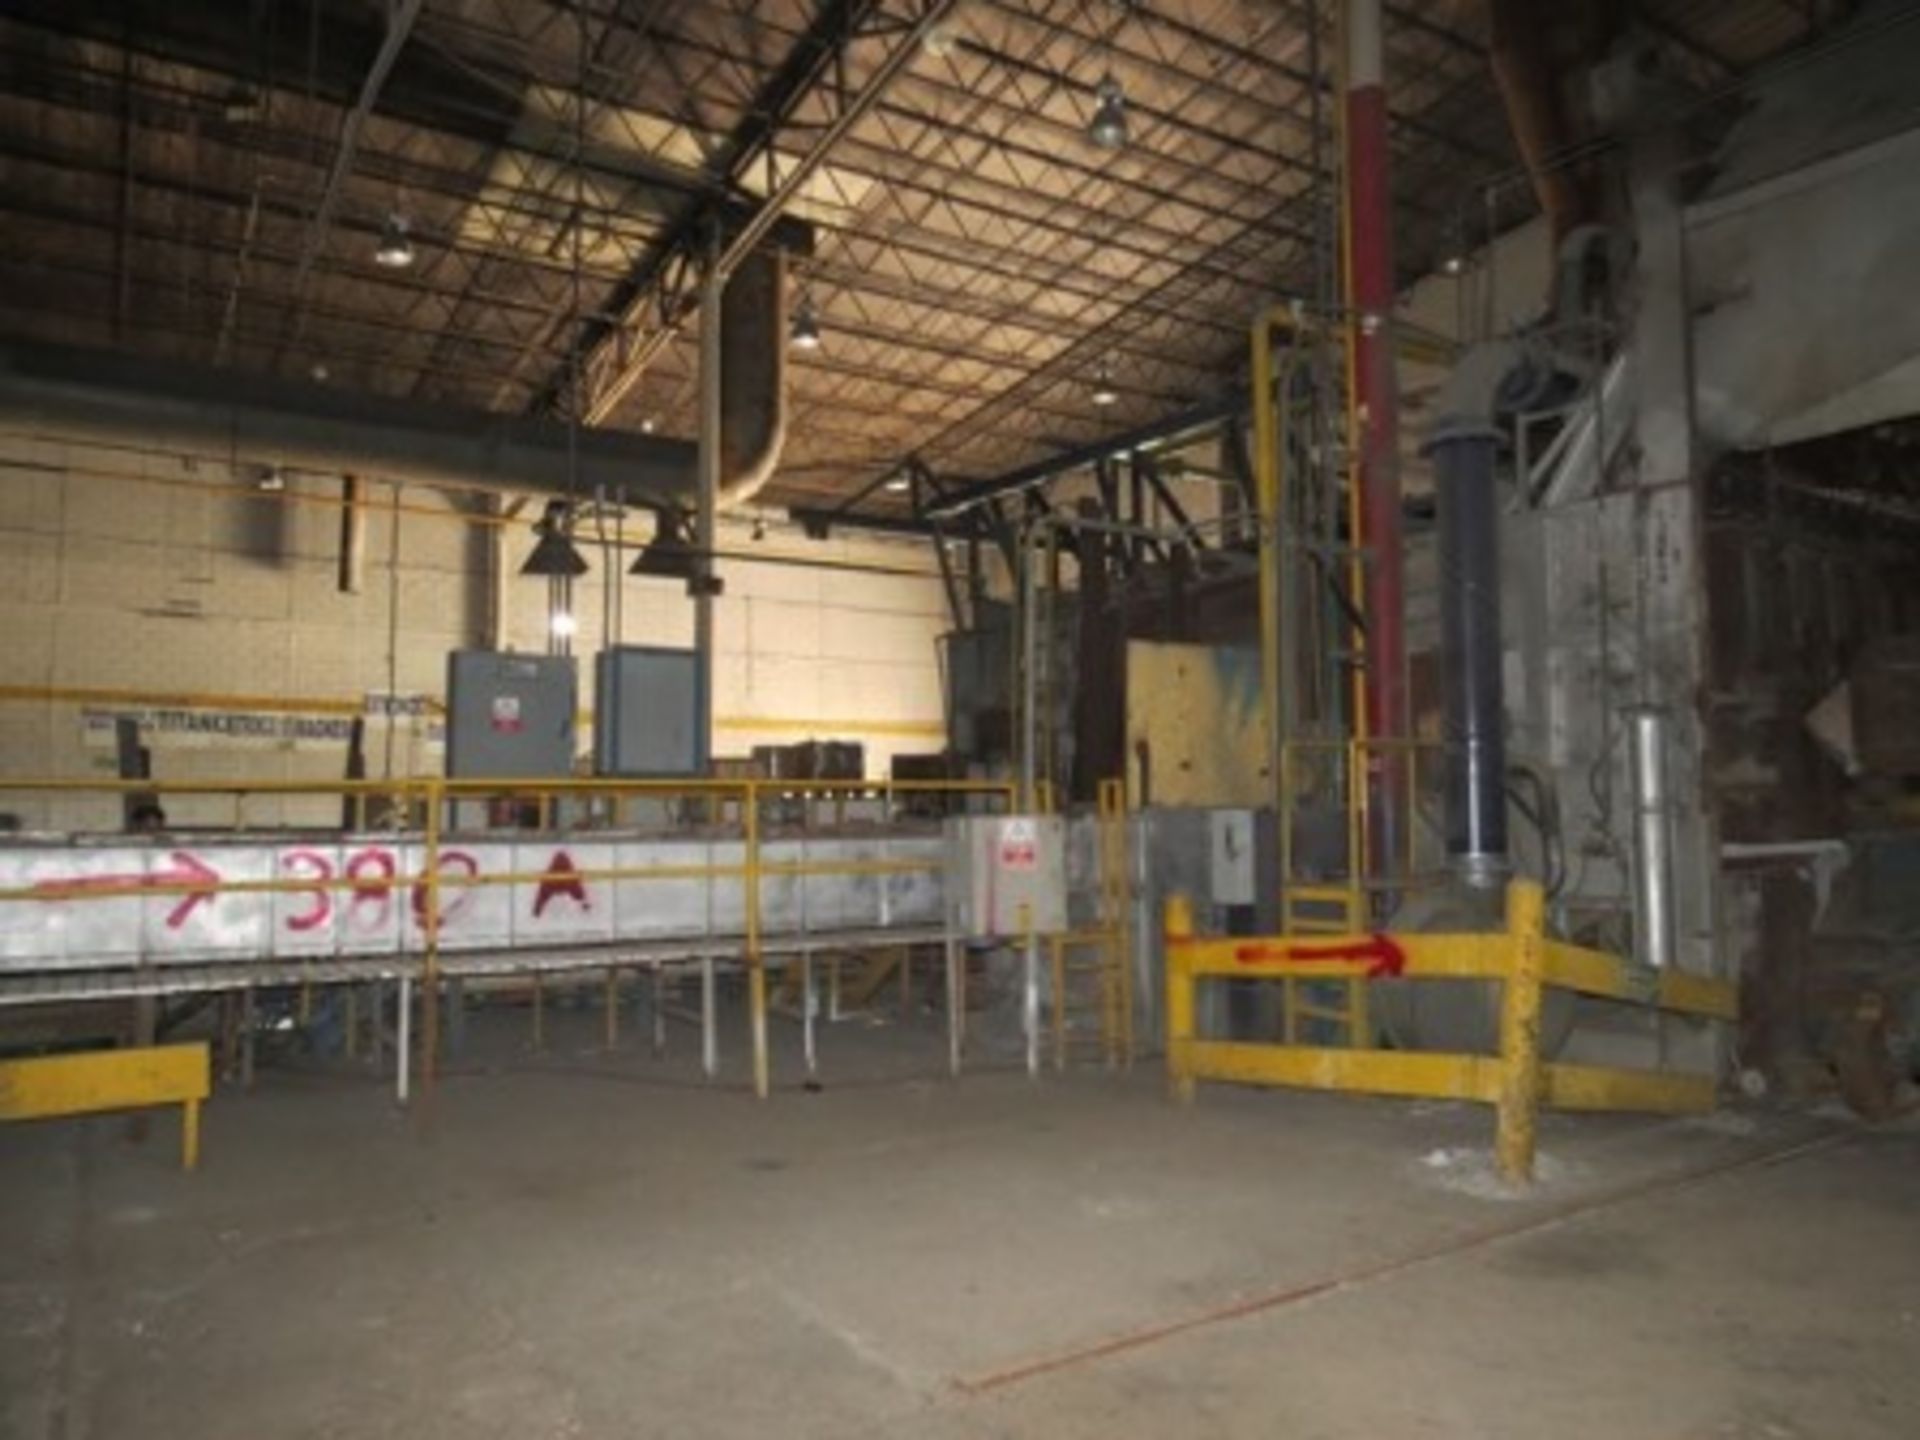 Melting furnace with dumper, hood and ductwork for gas extraction. - Image 7 of 28